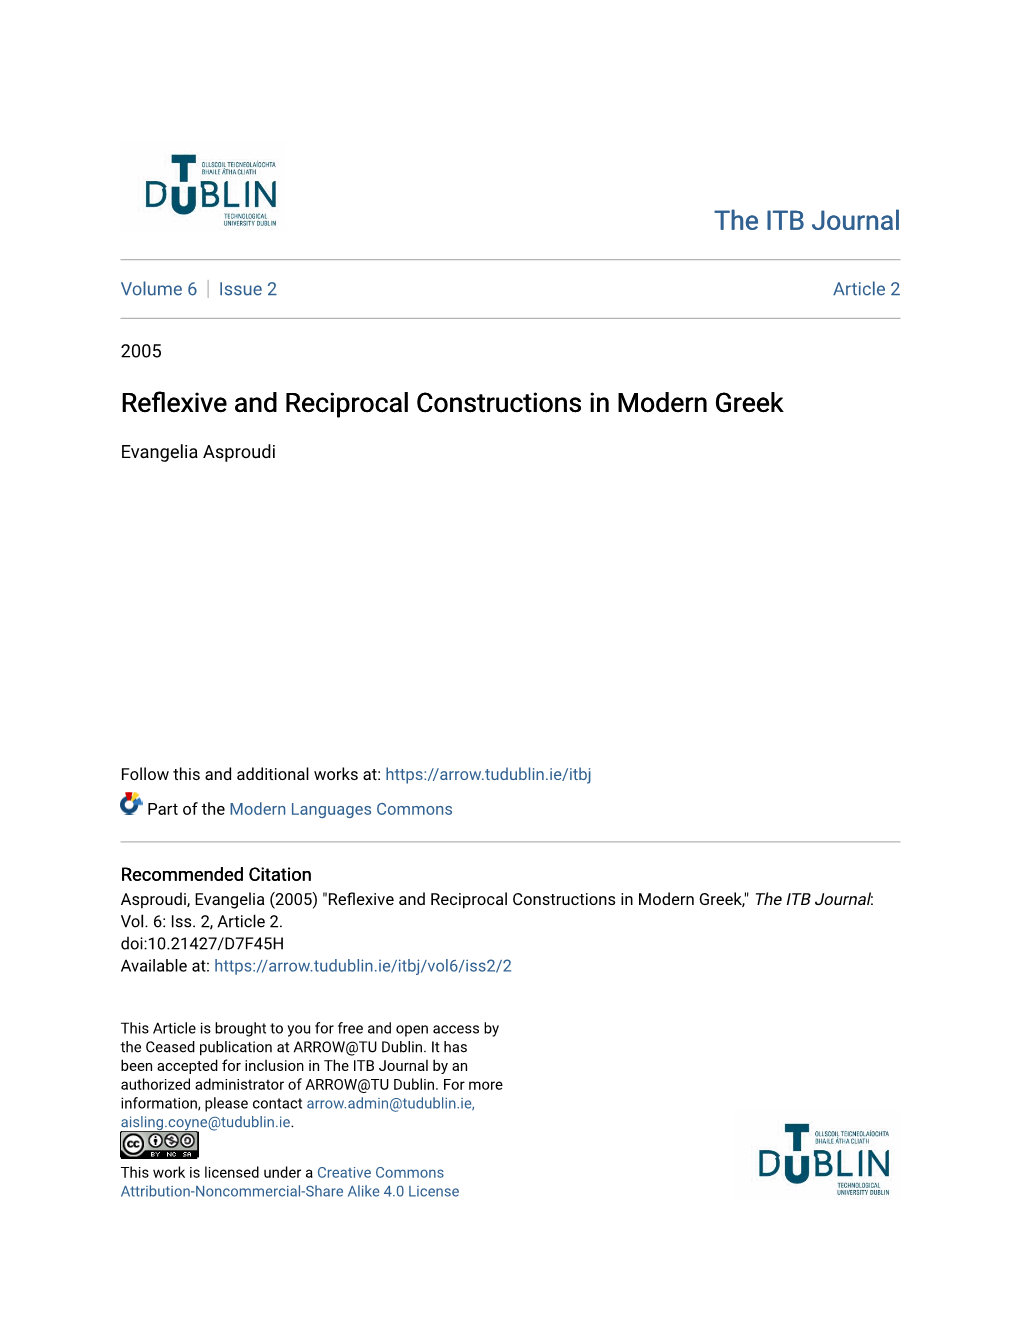 Reflexive and Reciprocal Constructions in Modern Greek